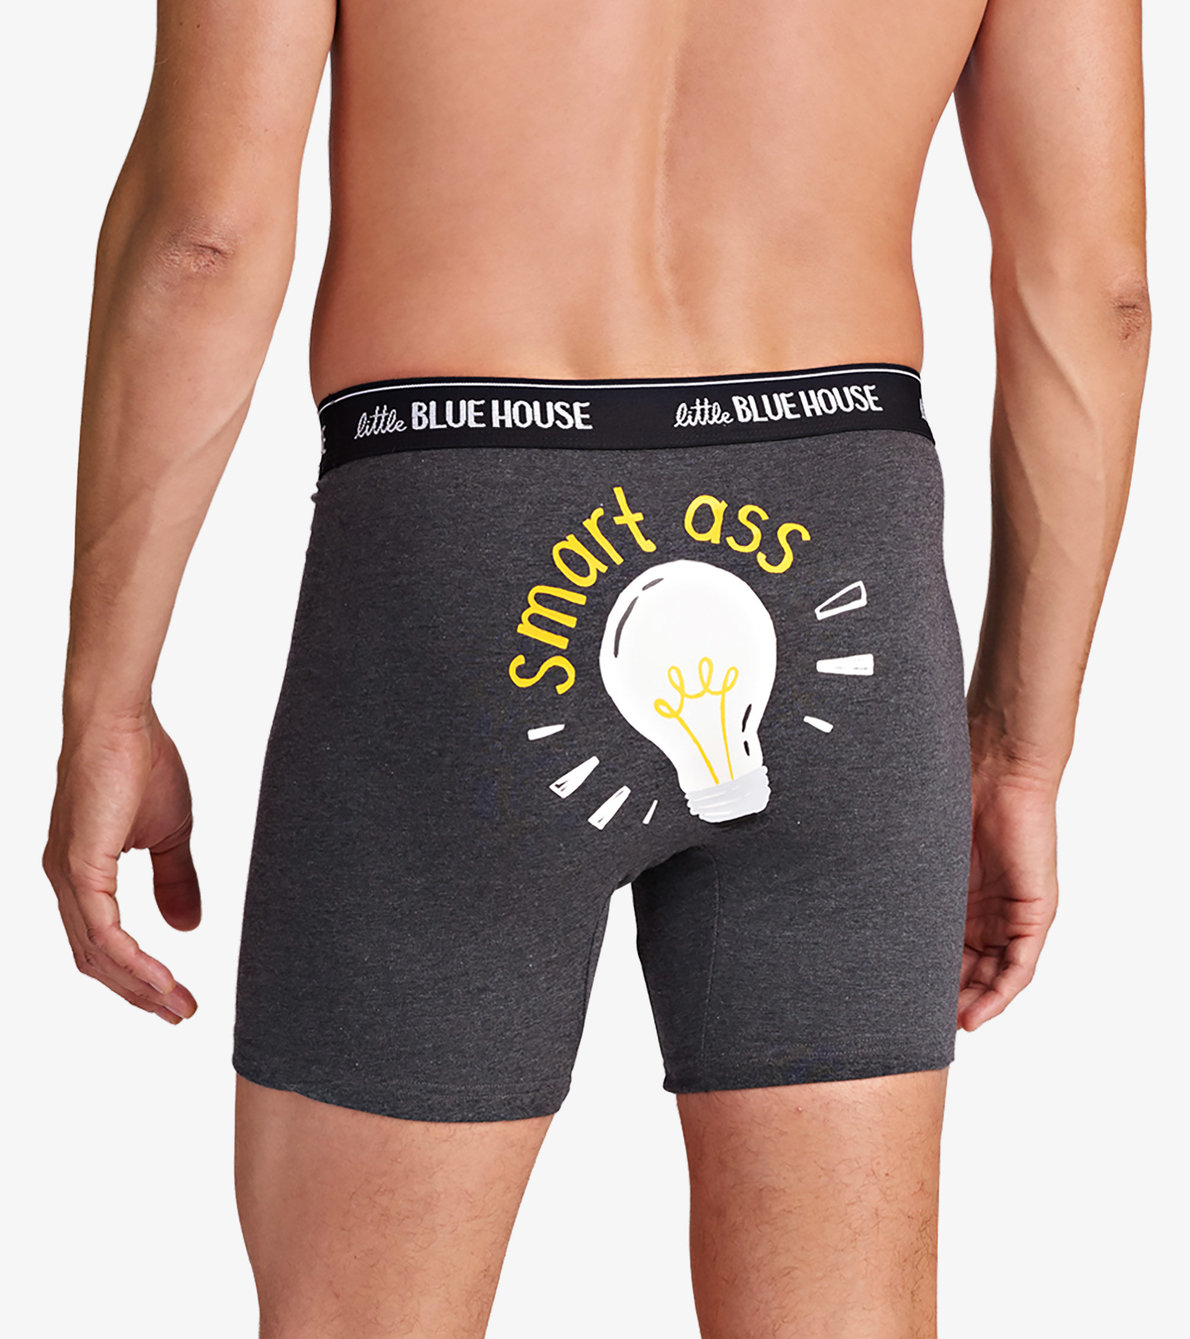 View larger image of Smart Ass Men's Glow in the Dark Boxer Briefs